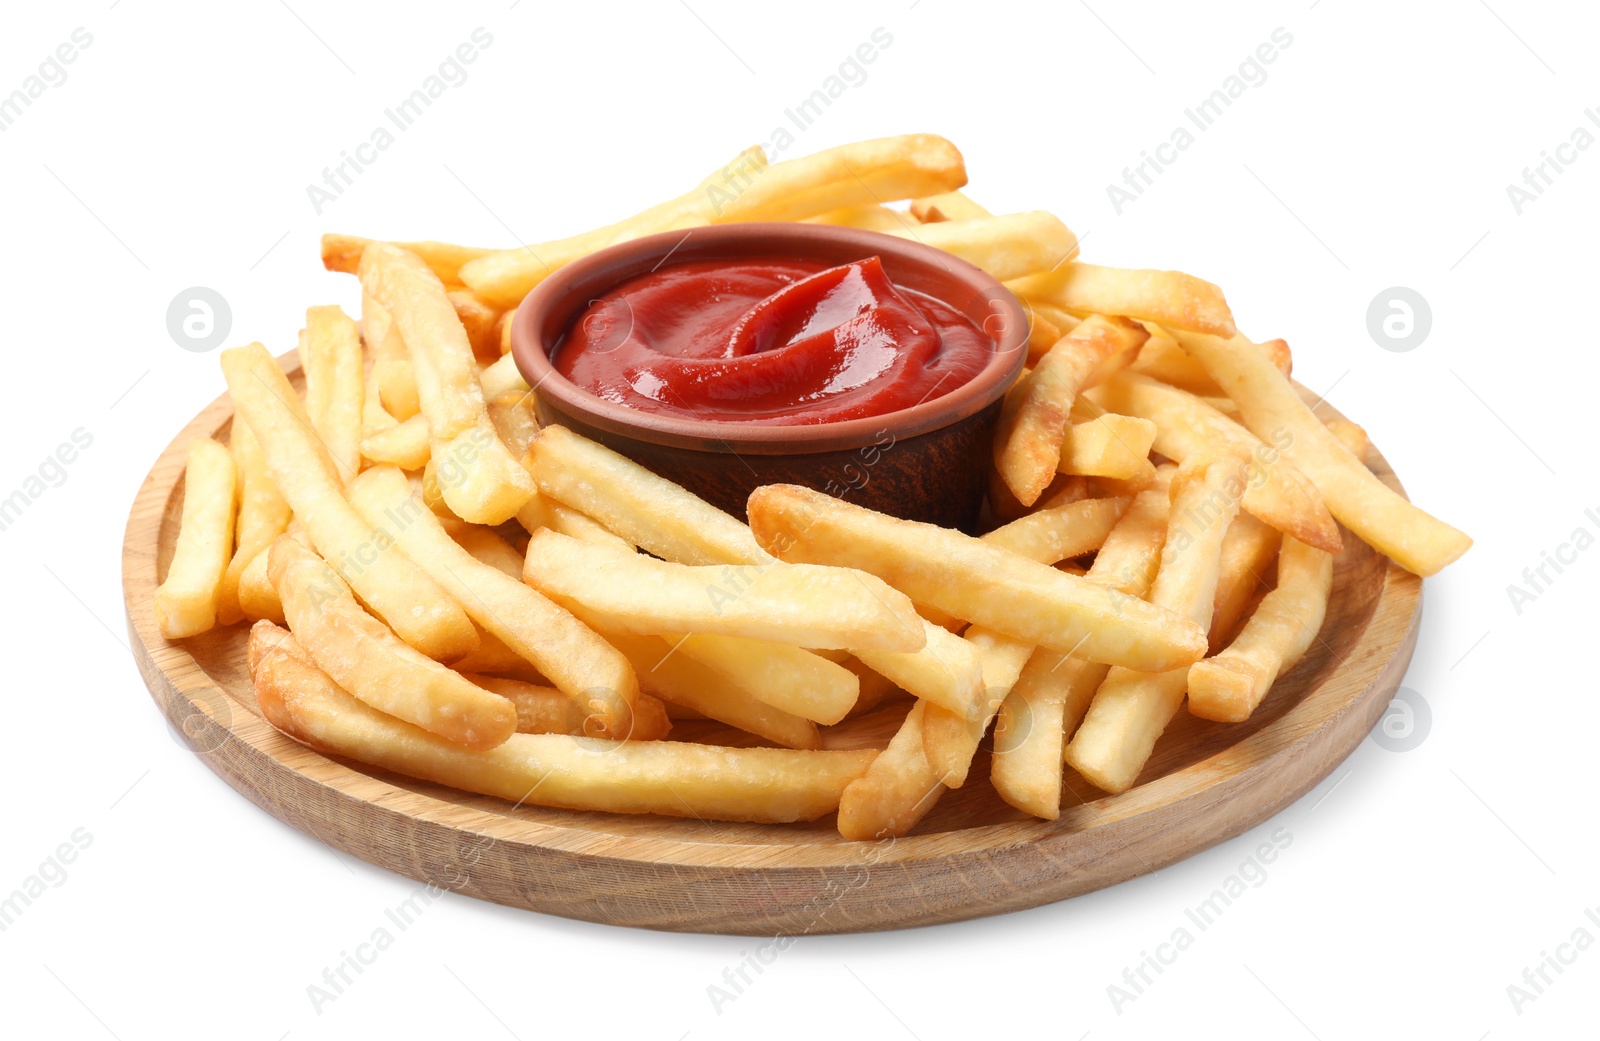 Photo of Wooden plate of delicious french fries with ketchup on white background